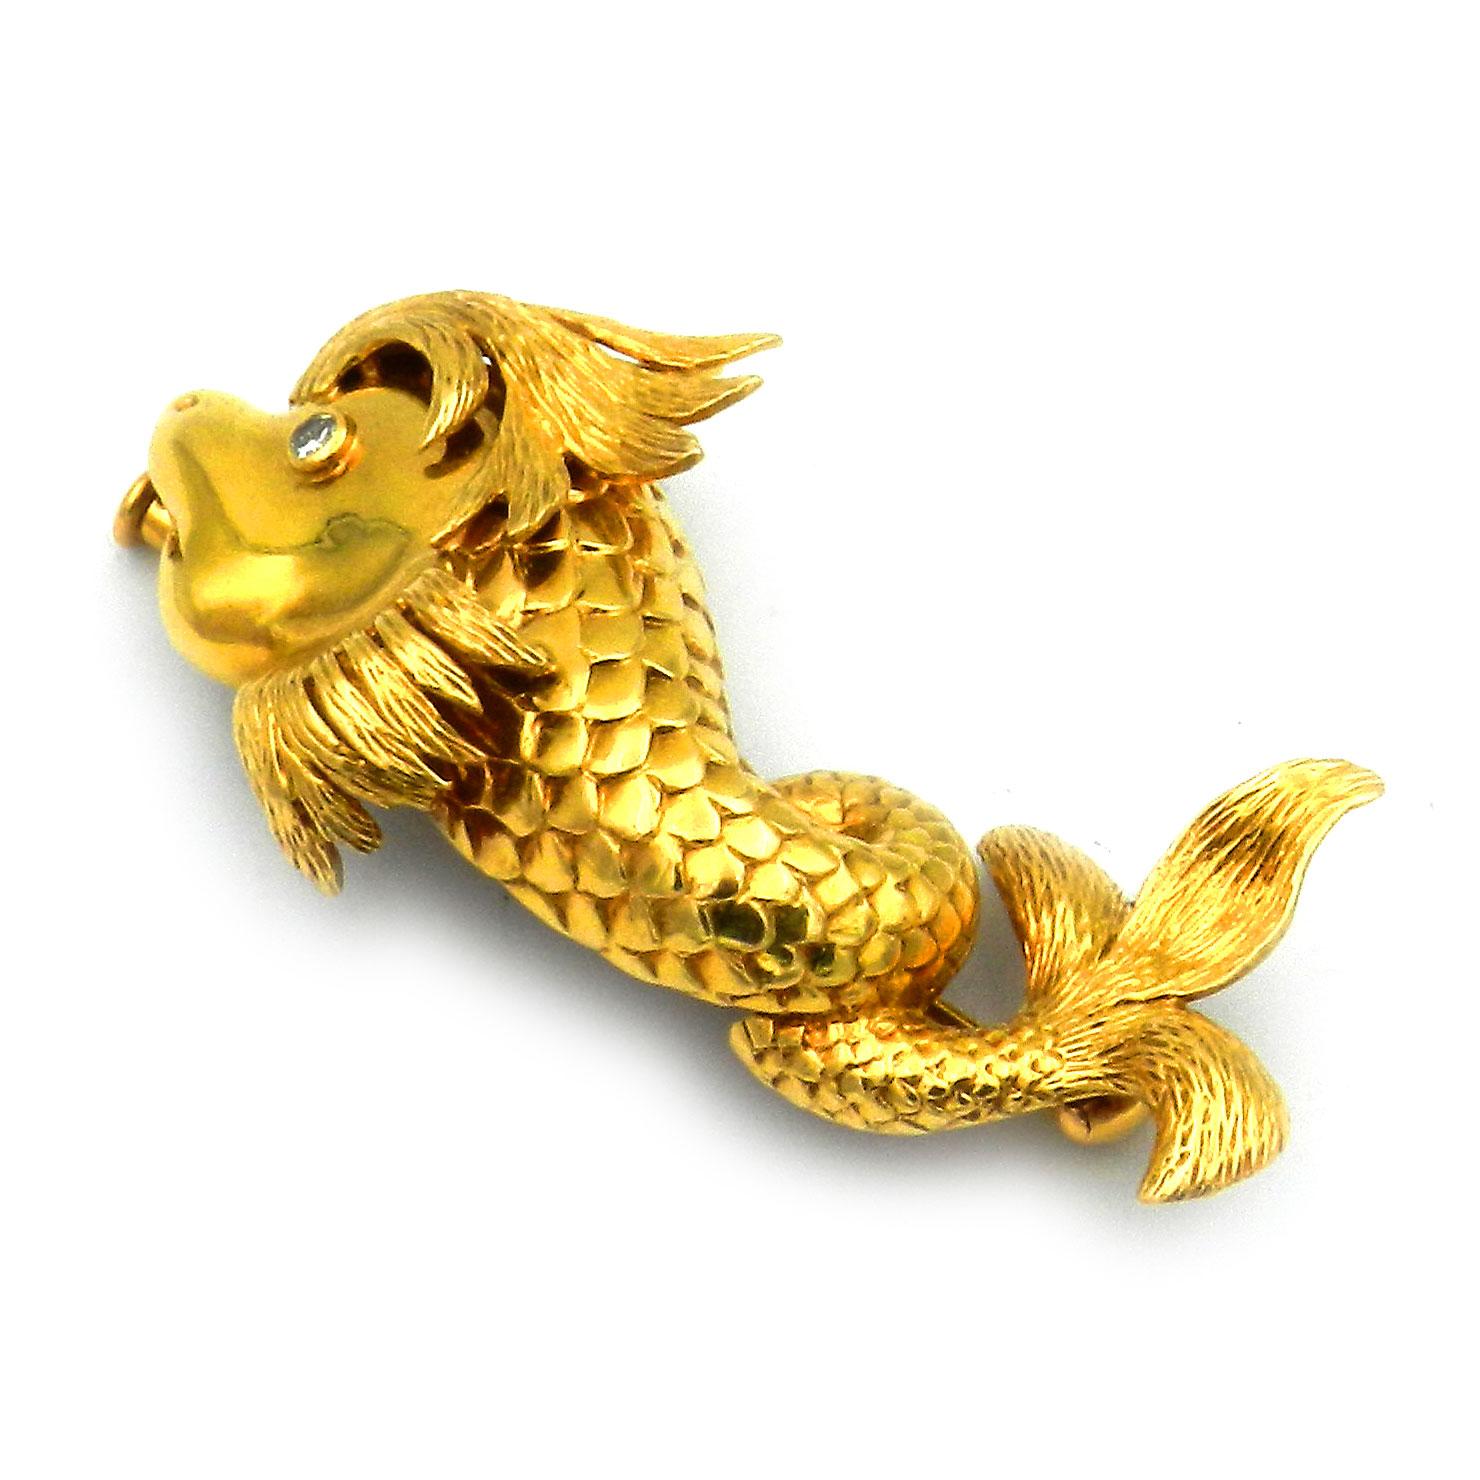 Chaumet Vintage 18K Gold Dolphin Brooch Paris 1960

This elegant gold brooch in the shape of a small dolphin was created by the Parisian luxury jeweler Chaumet in the 1960s. The enchanting creature is naturalistically designed by hand from